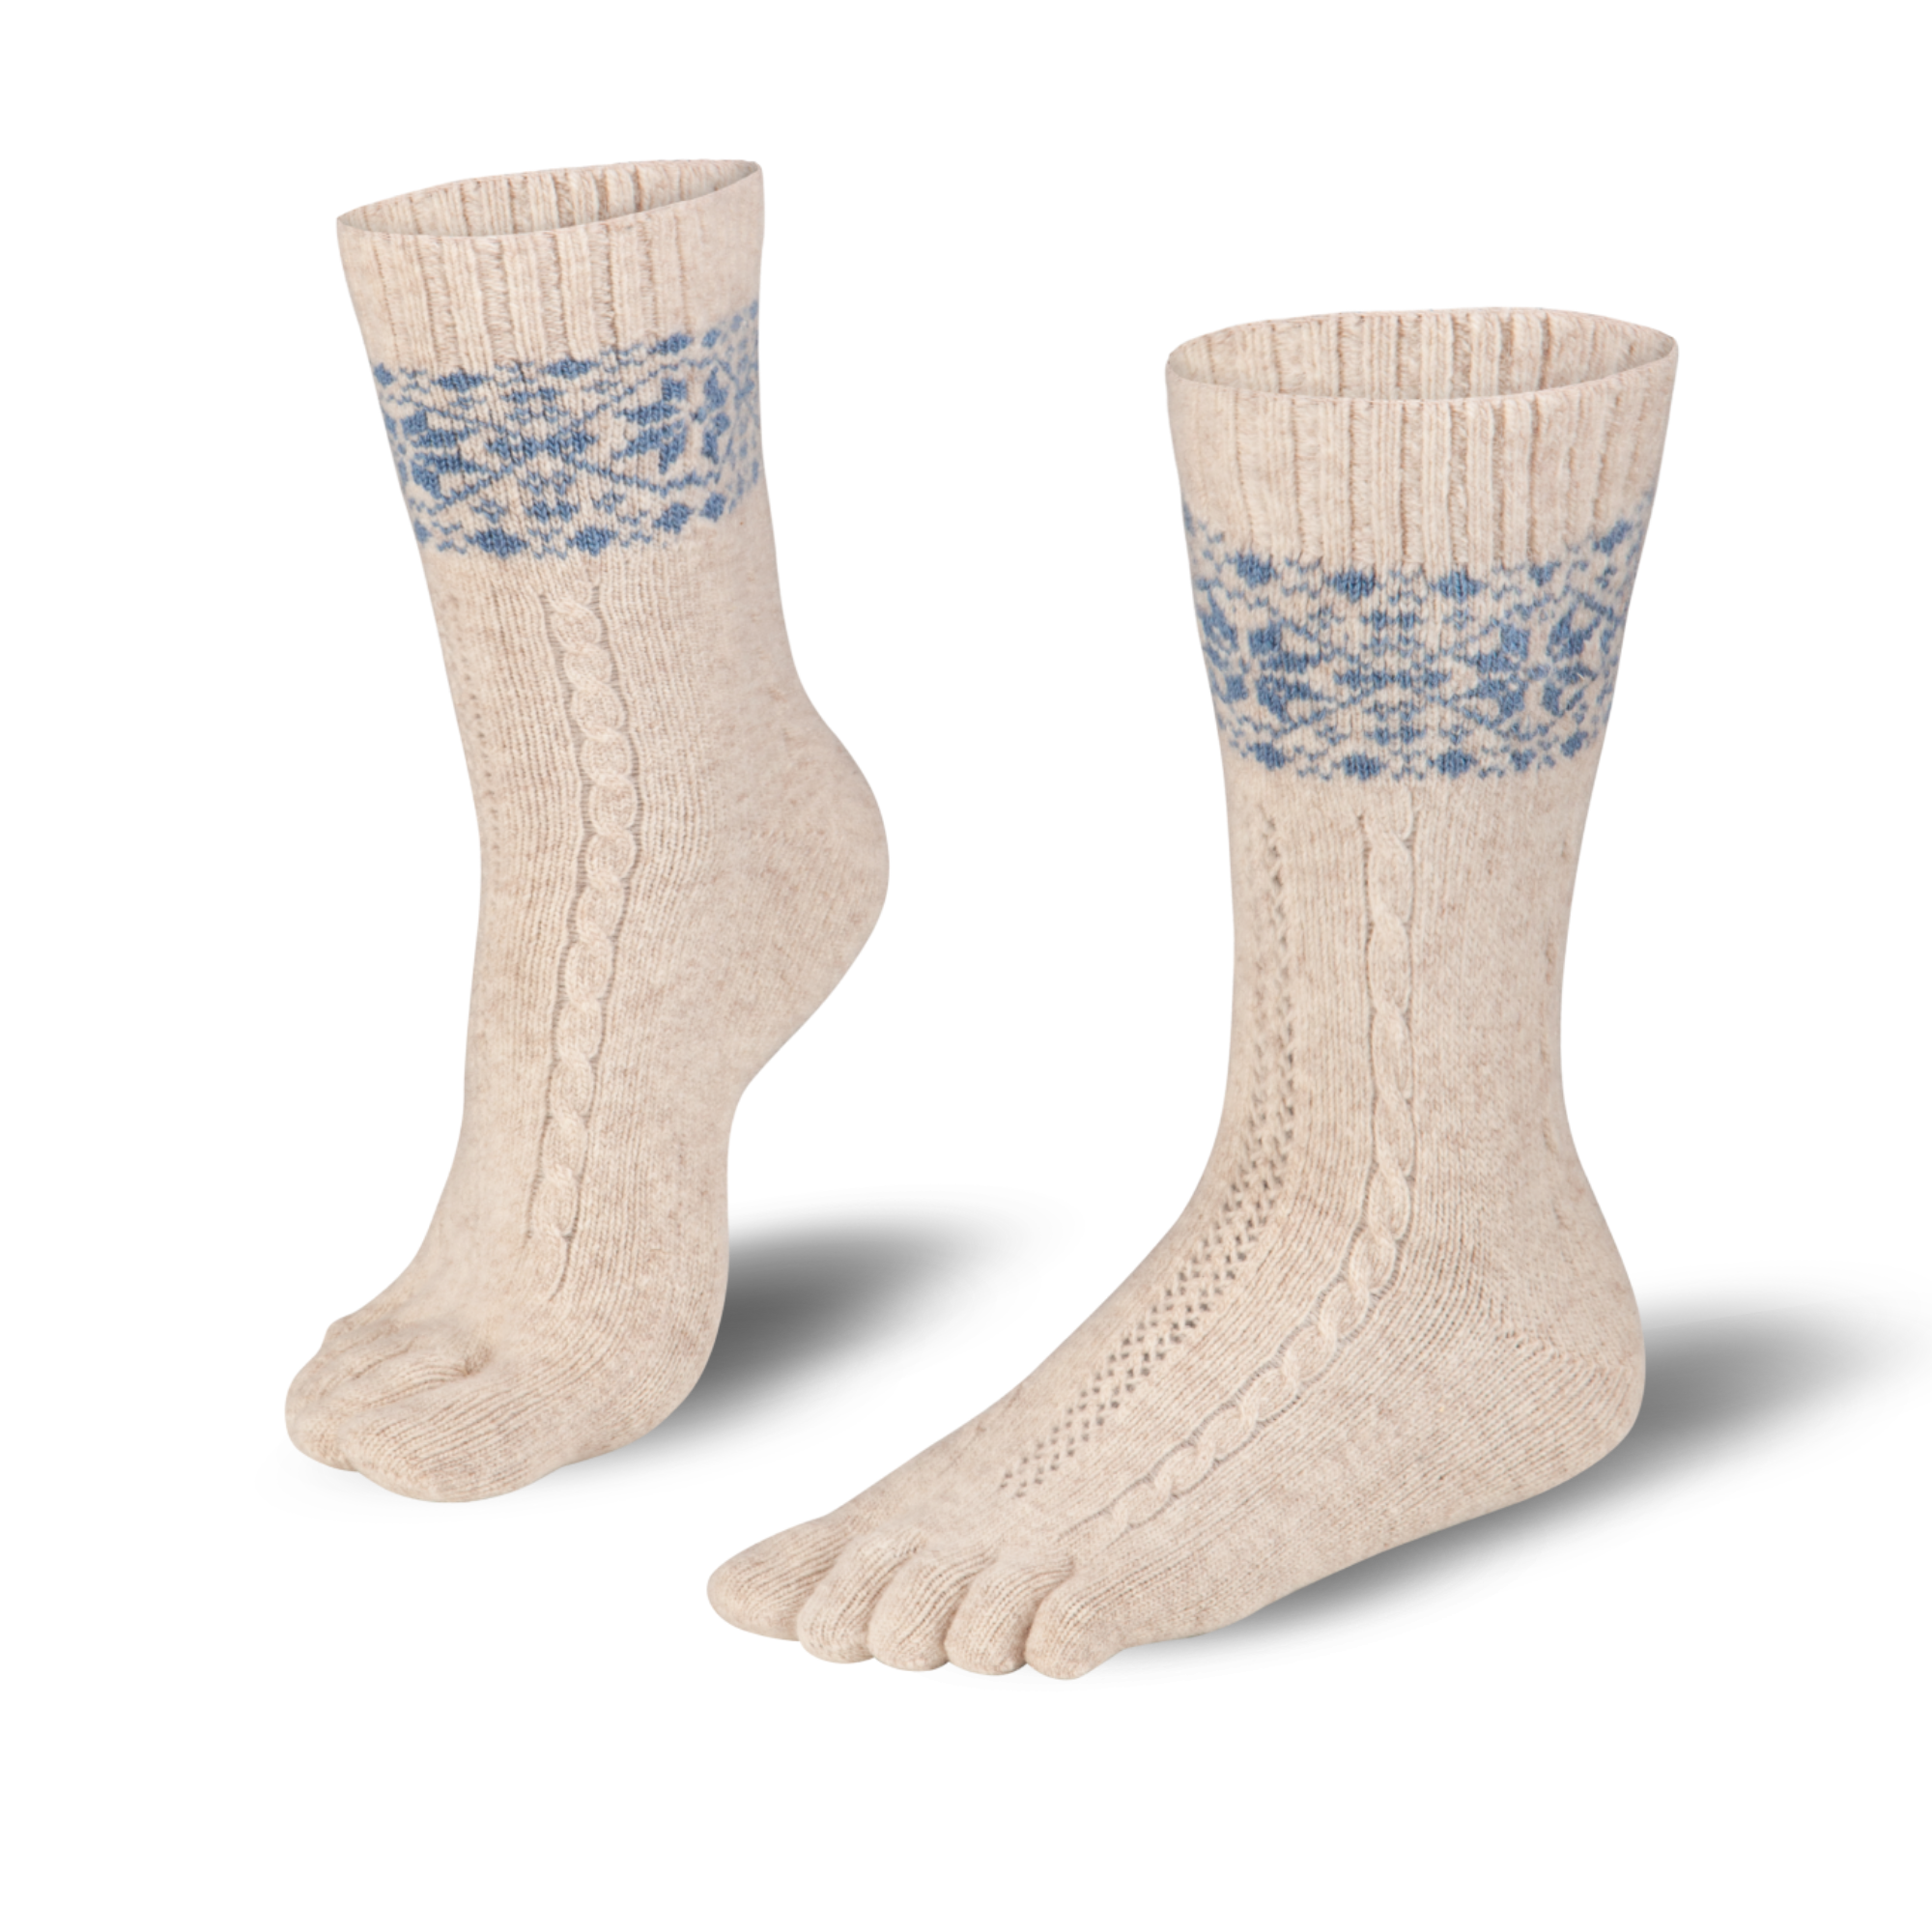  Knitido warm merino & cashmere toe socks with snow patches pattern in beige/light blue